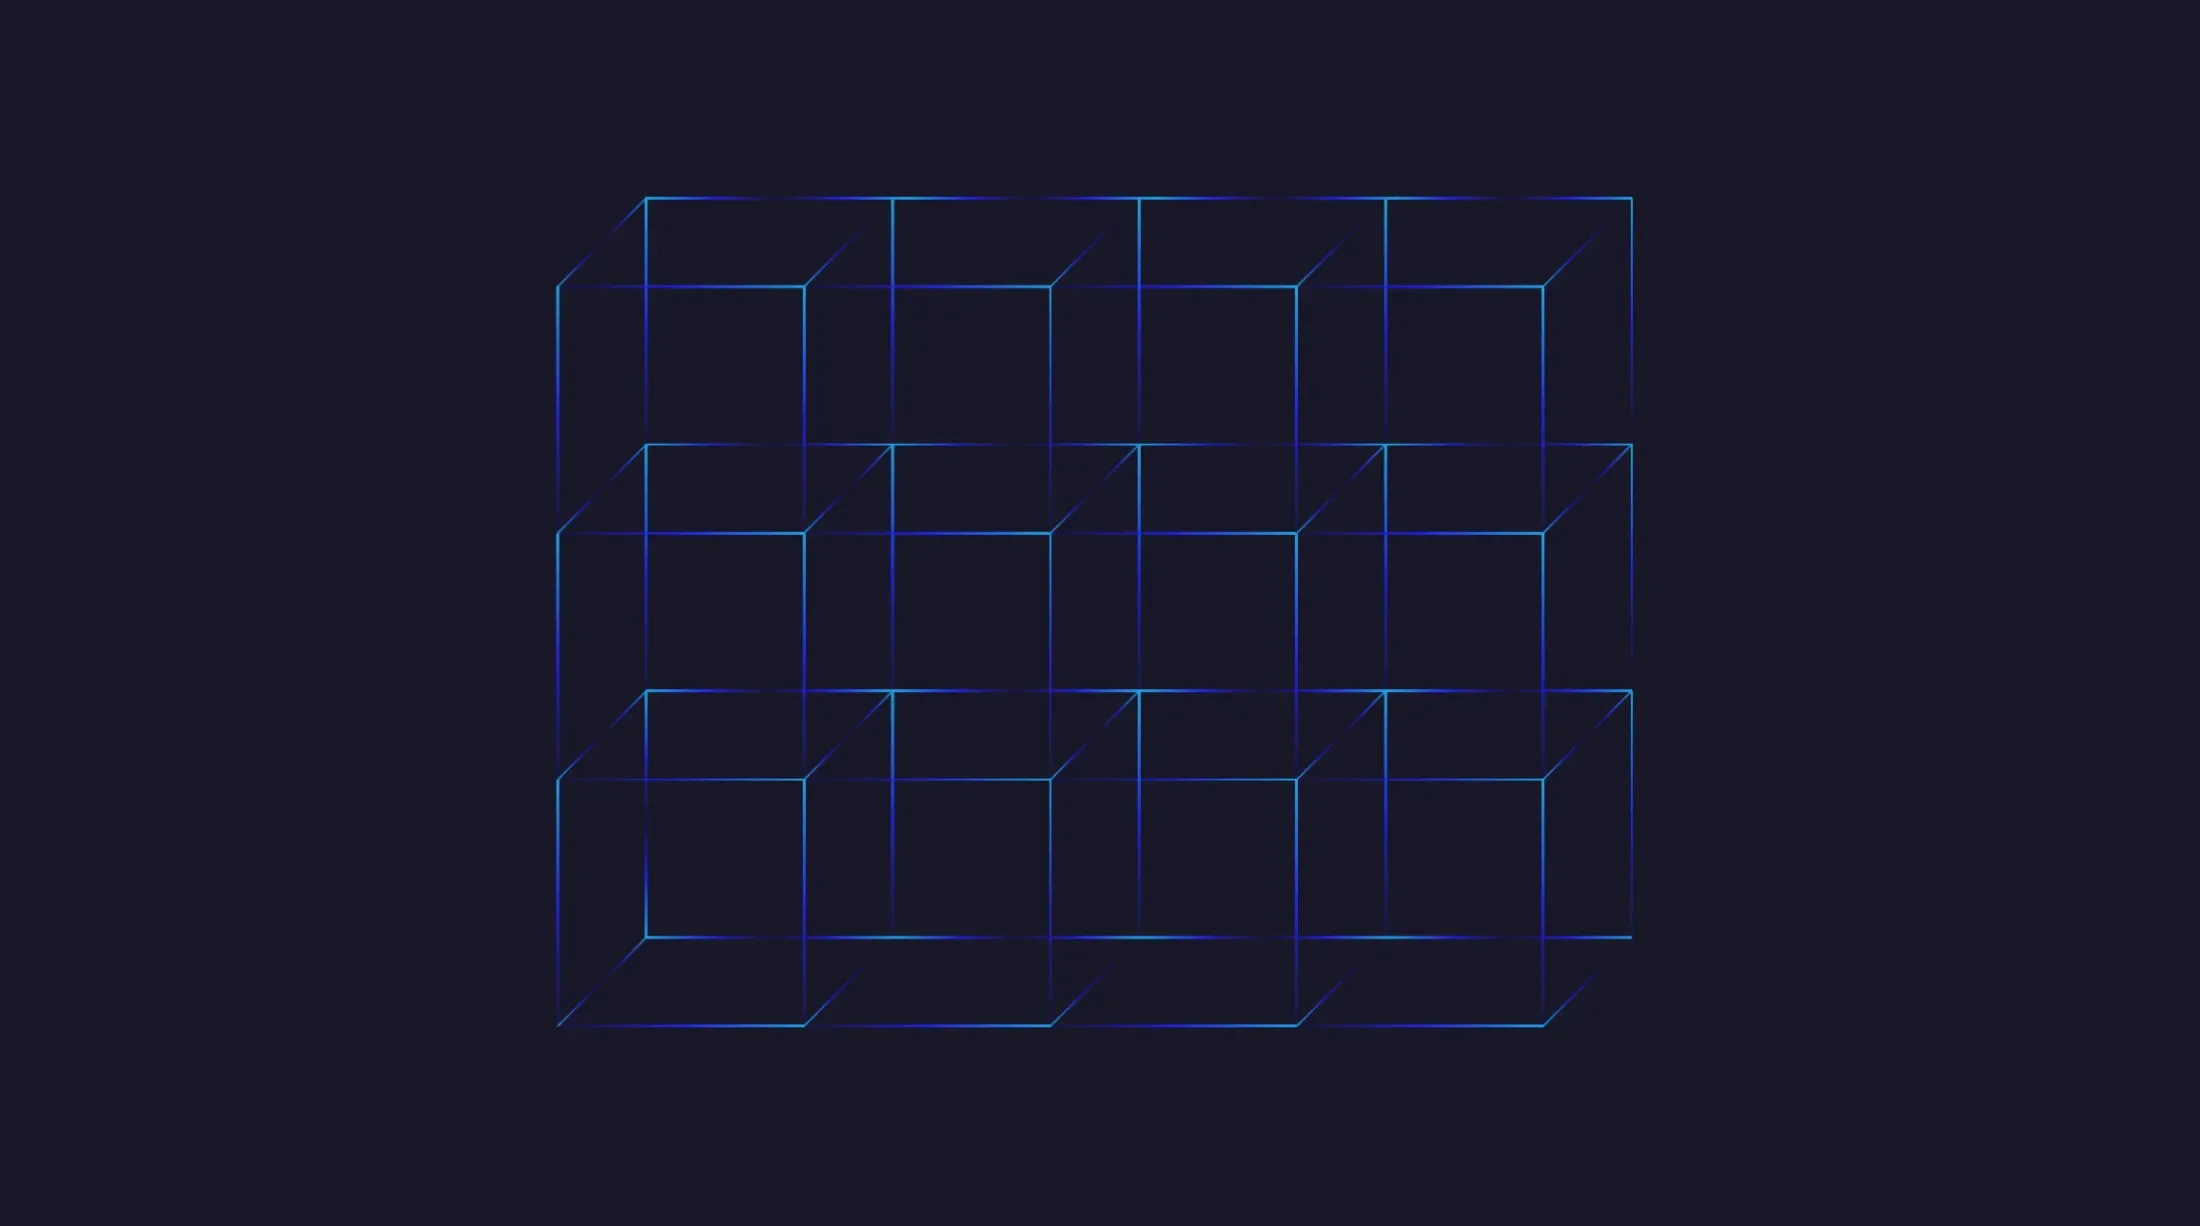 pattern of black cubes outlined in an iridescent blue